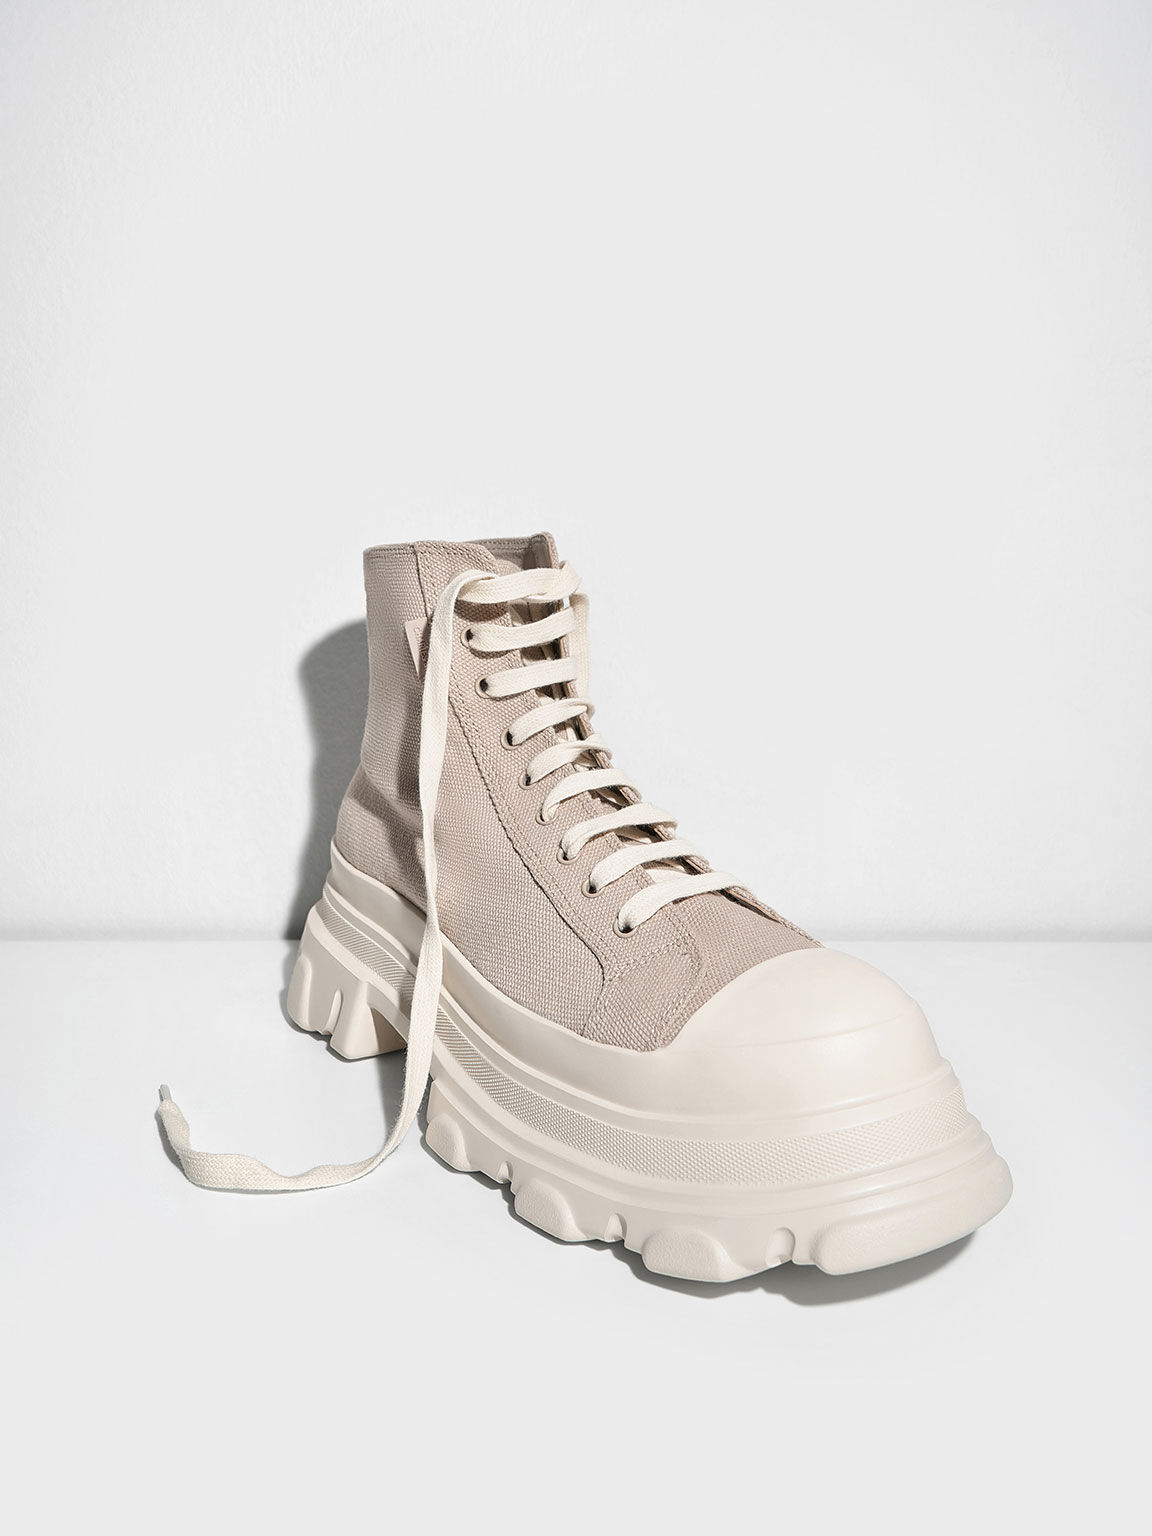 Canvas Chunky High-Top Sneakers, Sand, hi-res